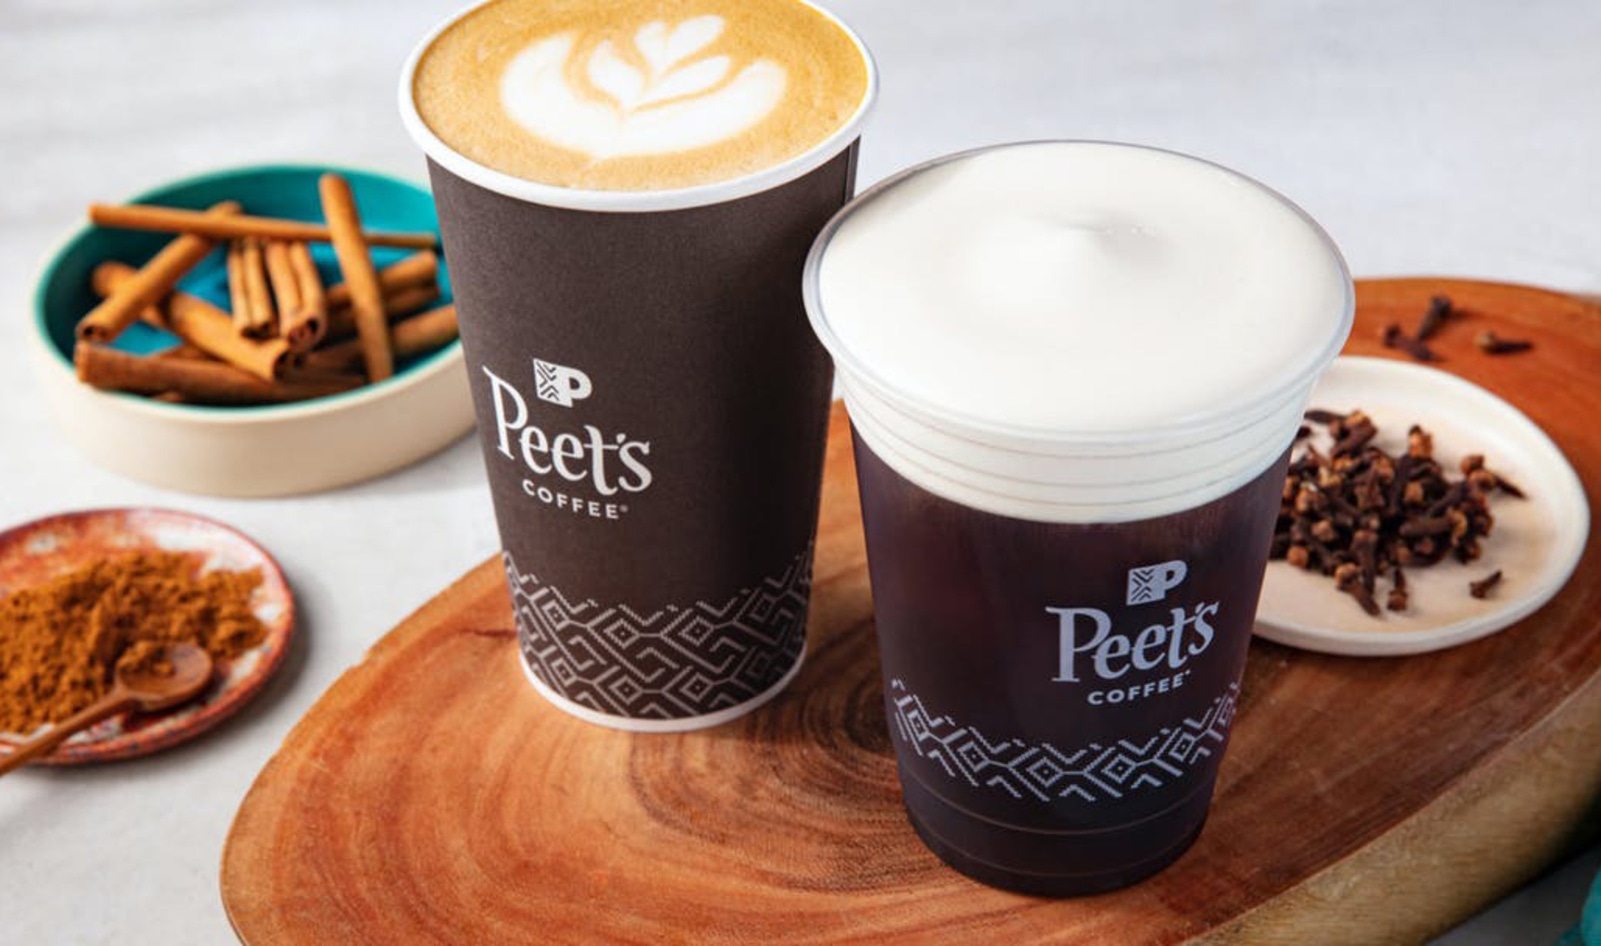 what kind of milk does peets have?